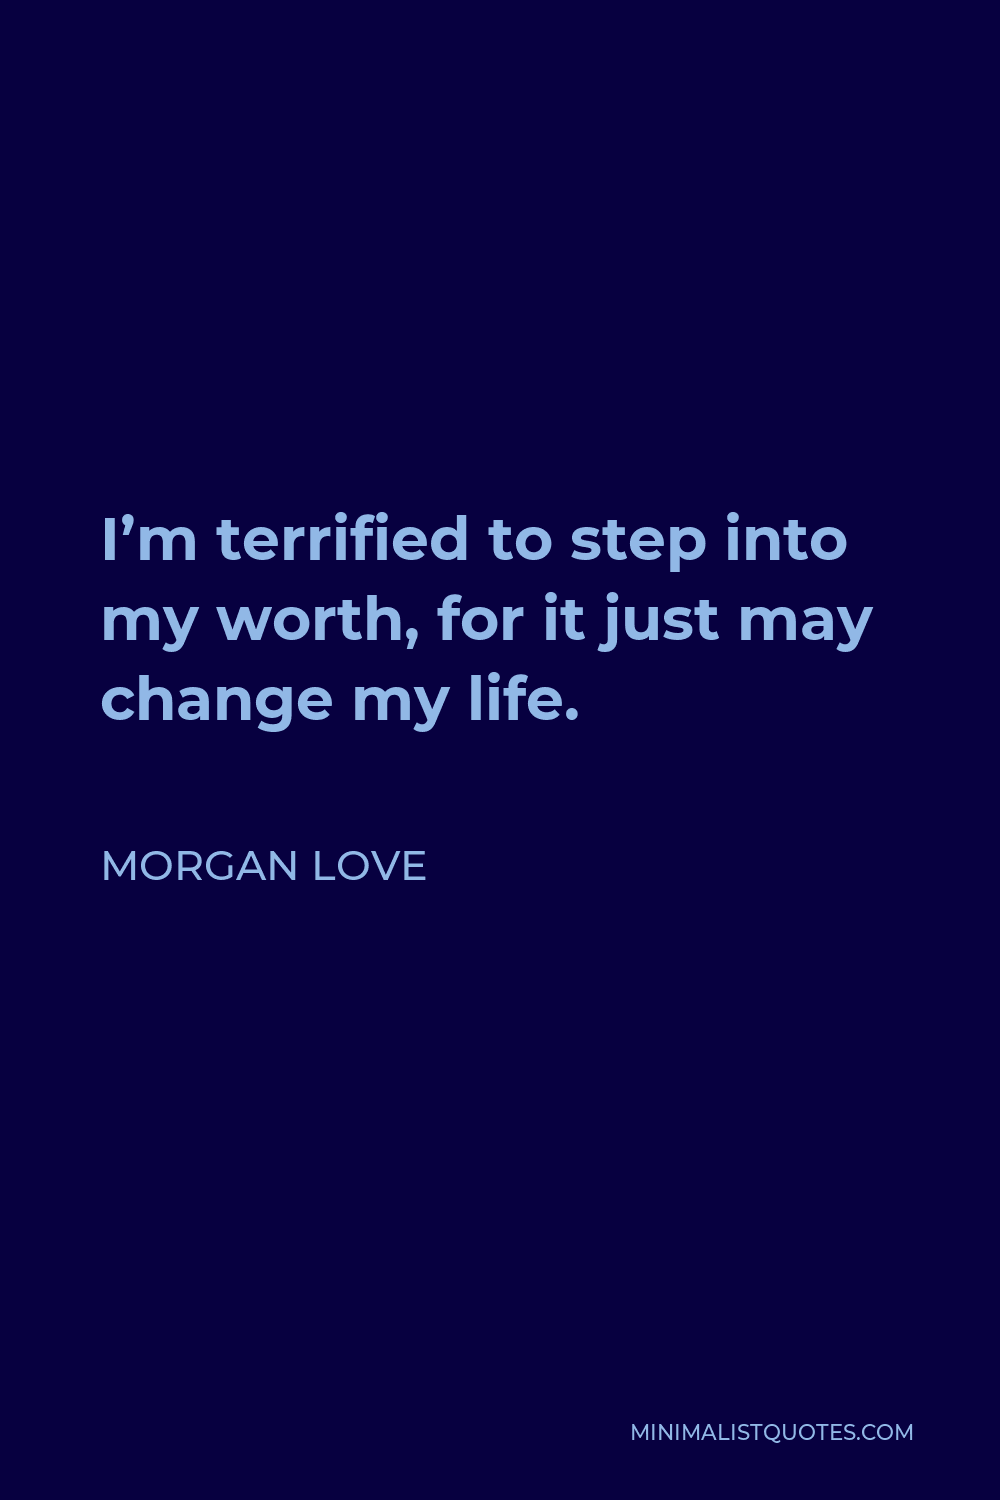 Morgan Love Quote - I’m terrified to step into my worth, for it just may change my life.